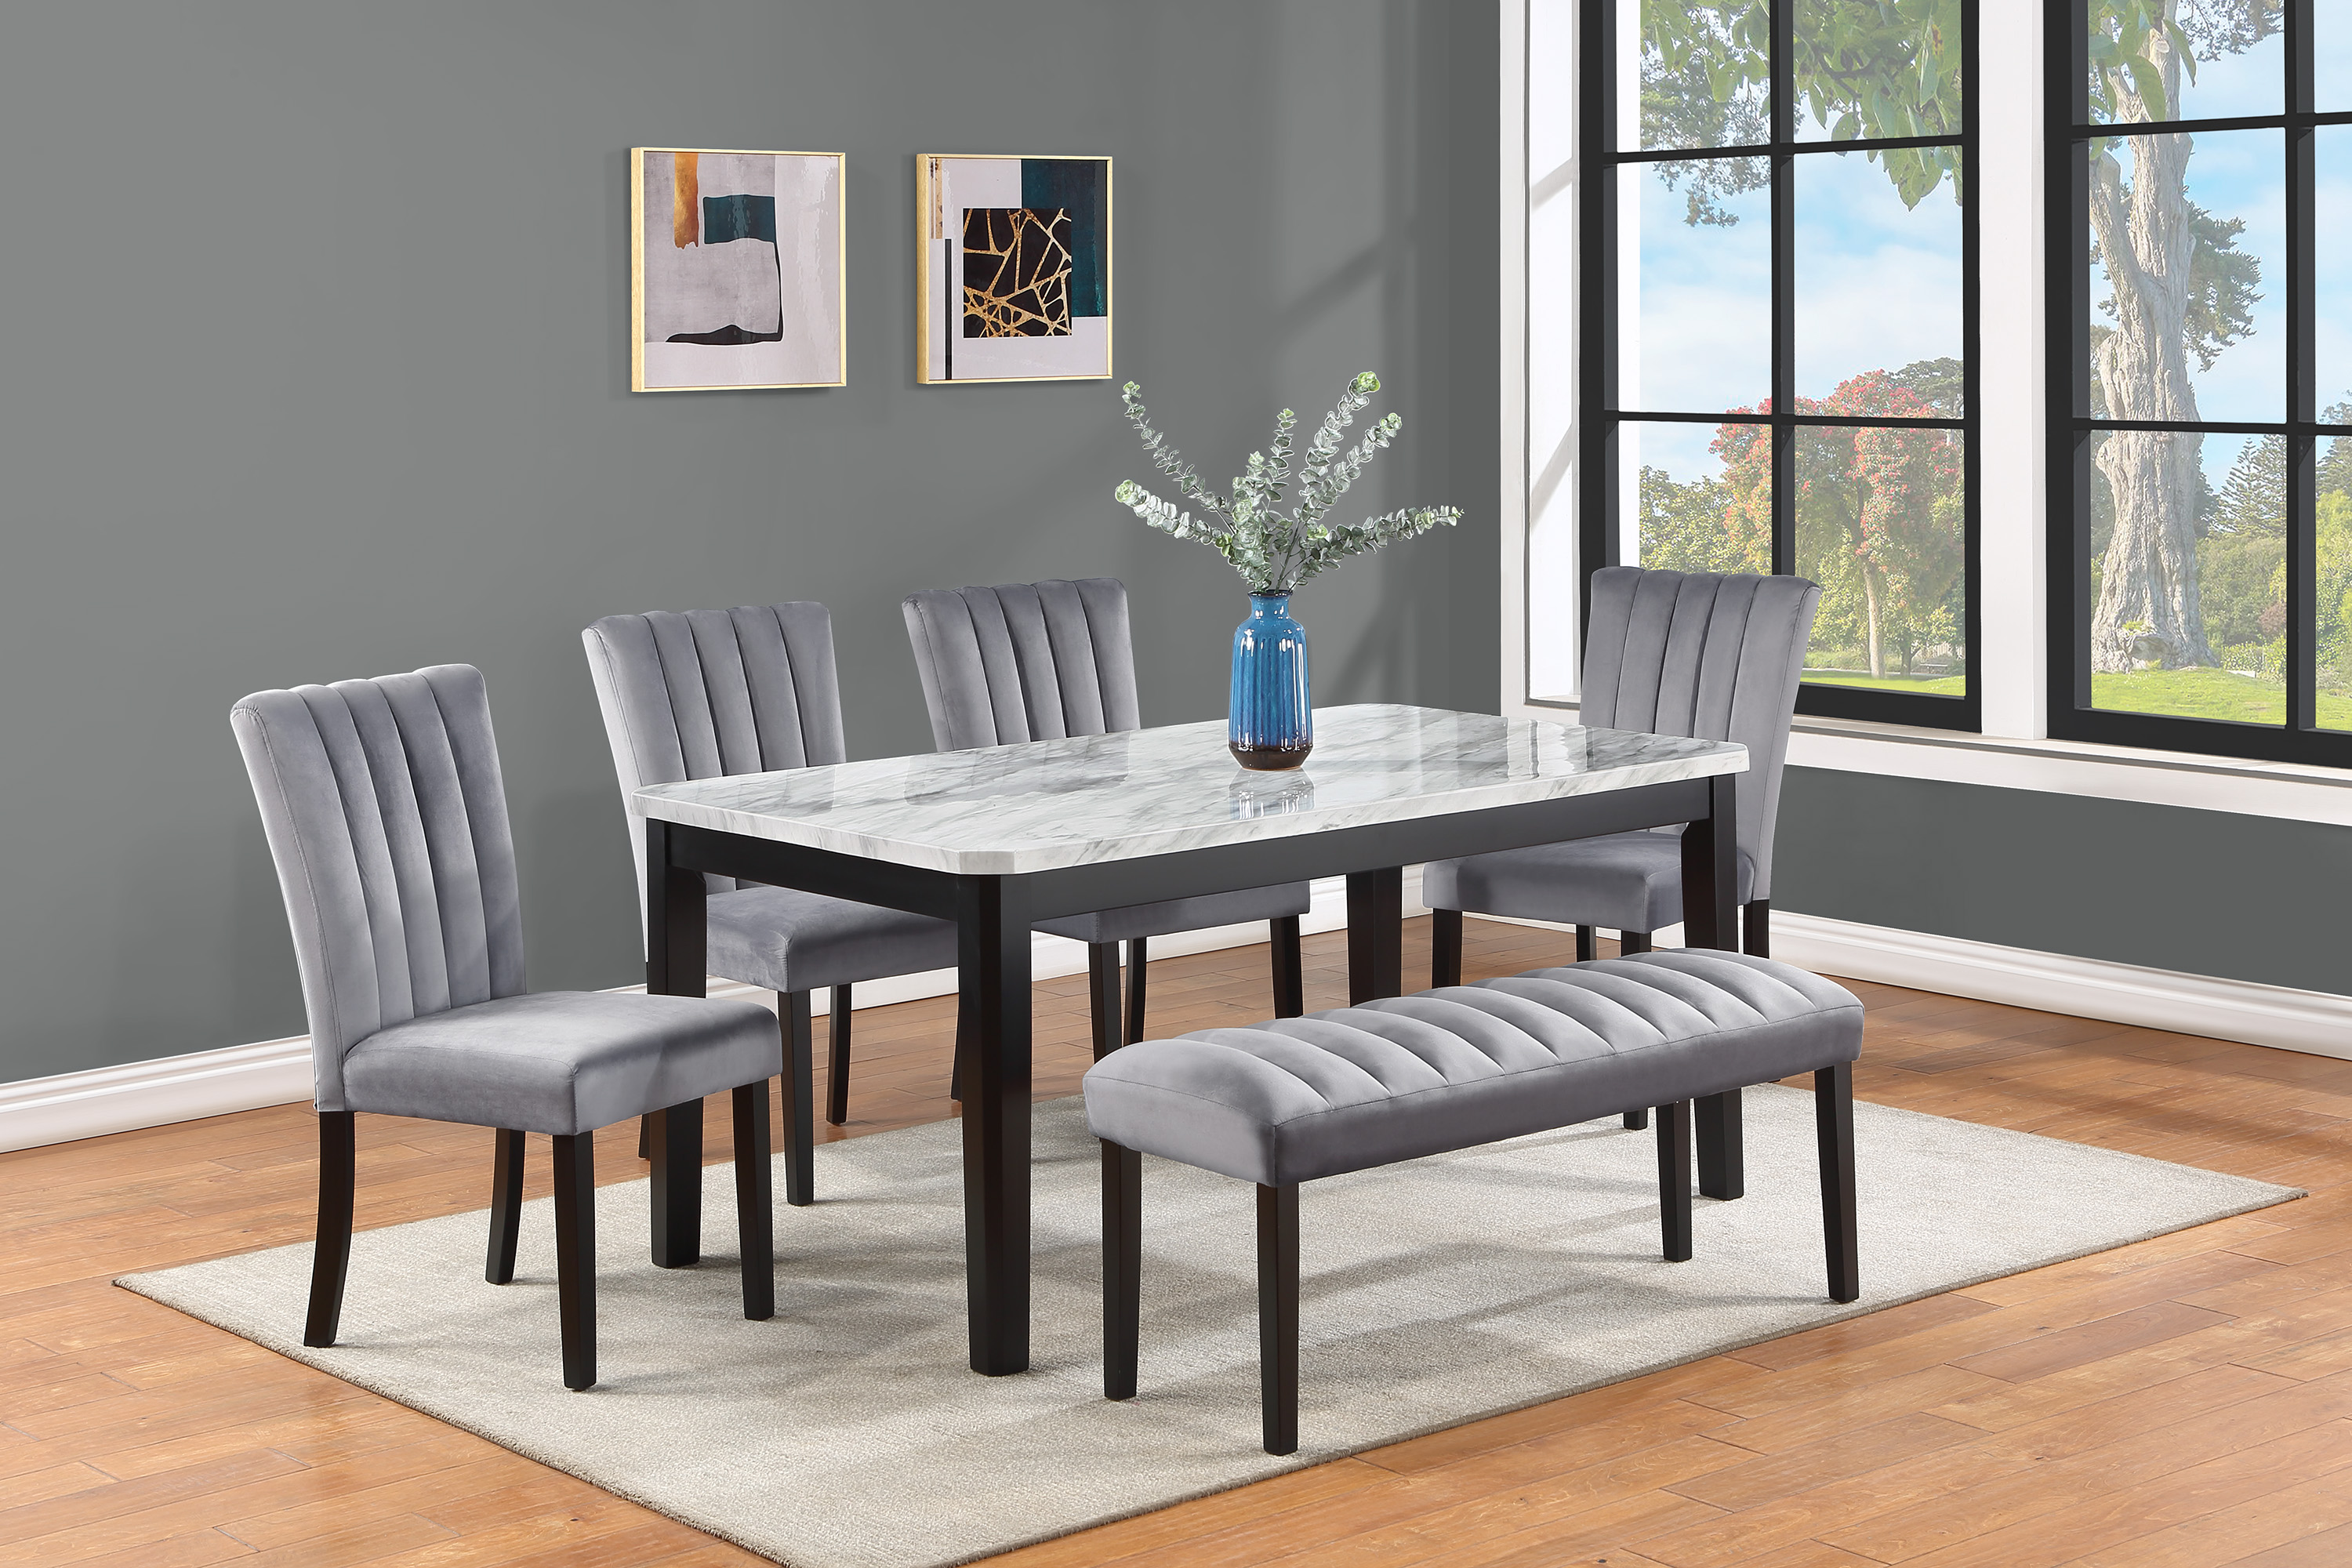 2224 PASCAL DINING 7PC SET with 6 chairs